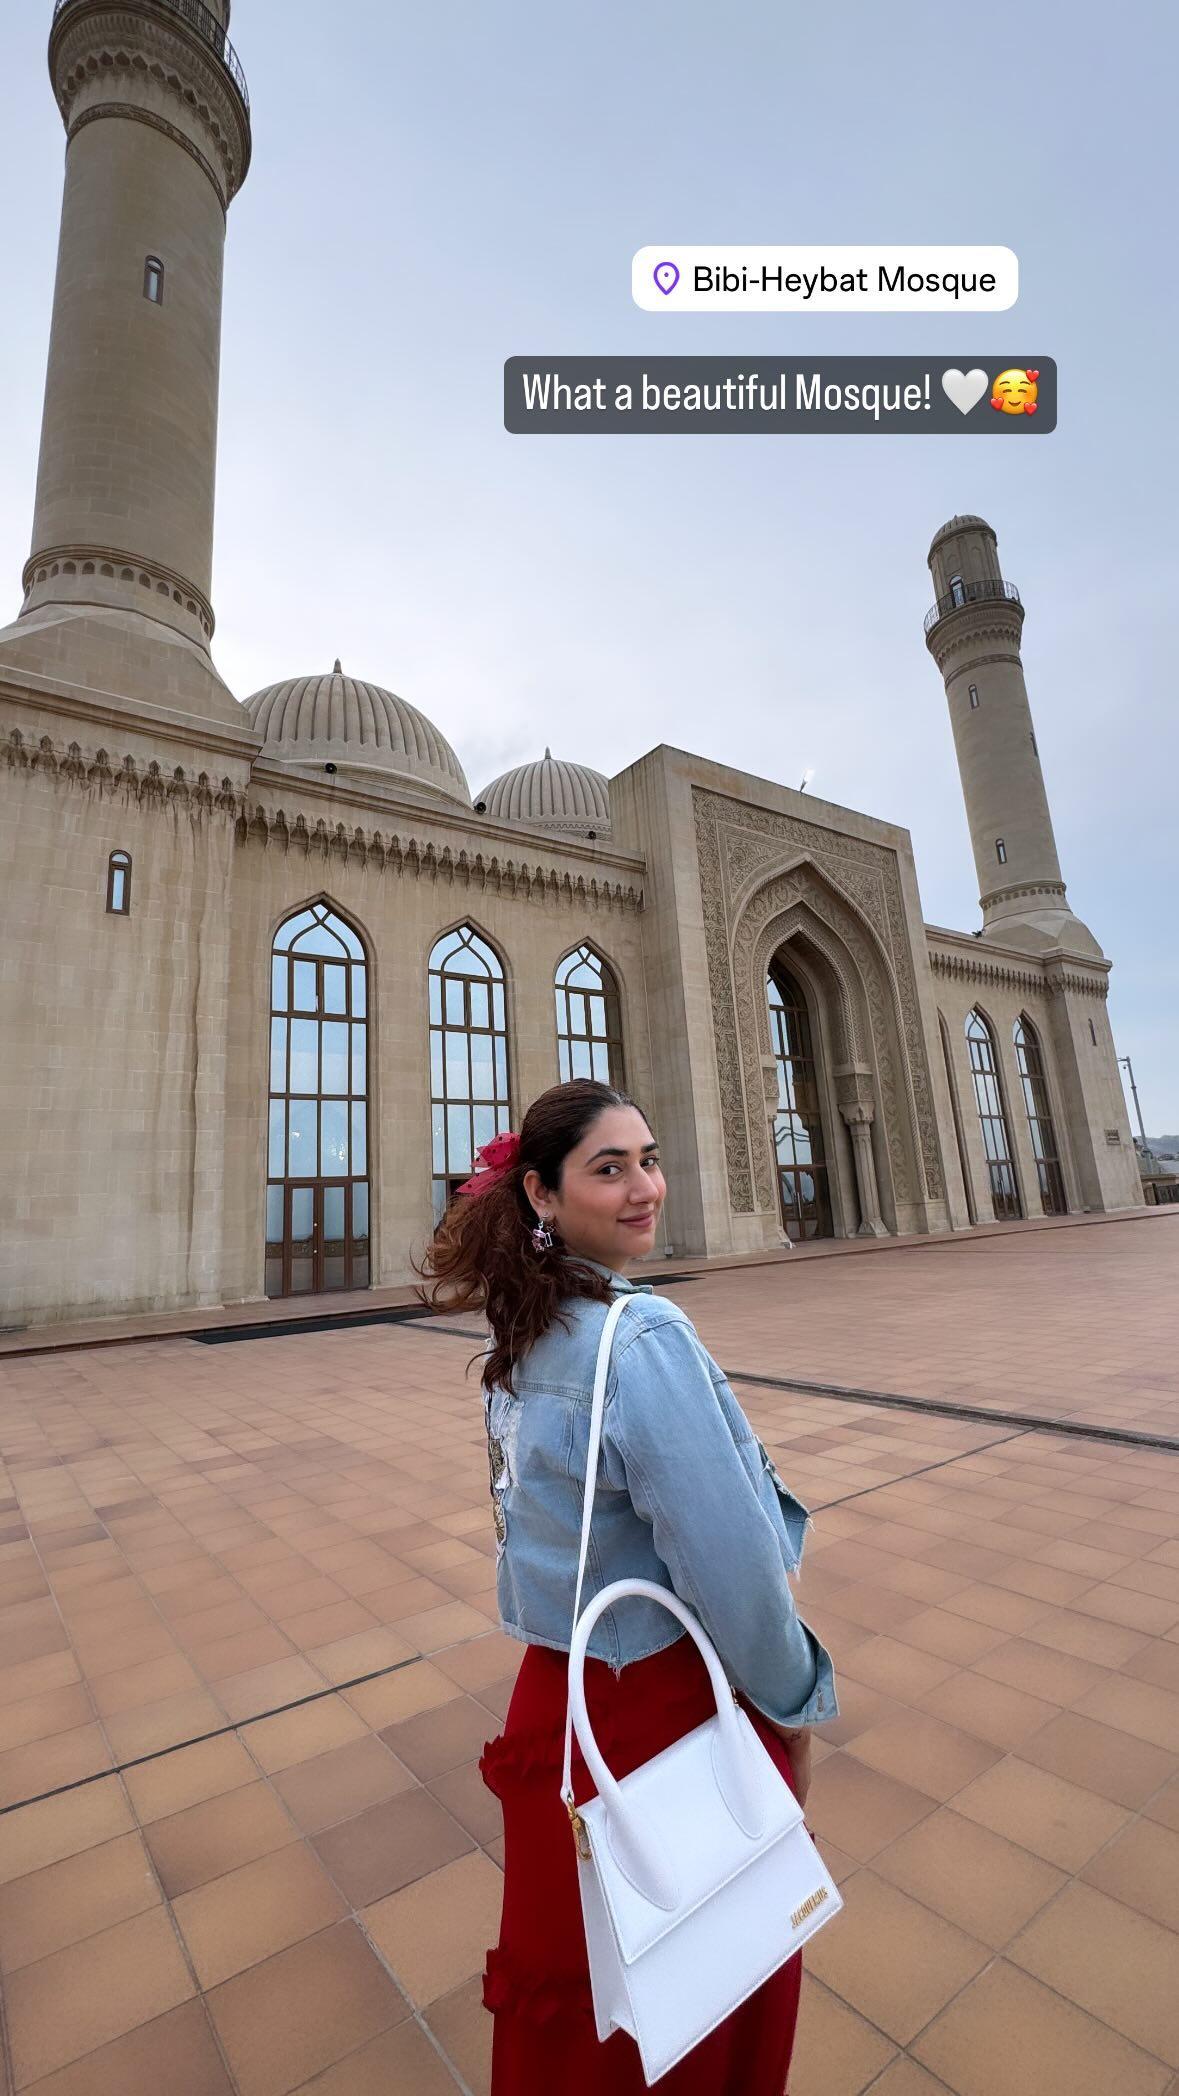 Disha and Rahul visited the Bibi-Heybat Mosque. Disha wore a red gown and paired it with a denim jacket